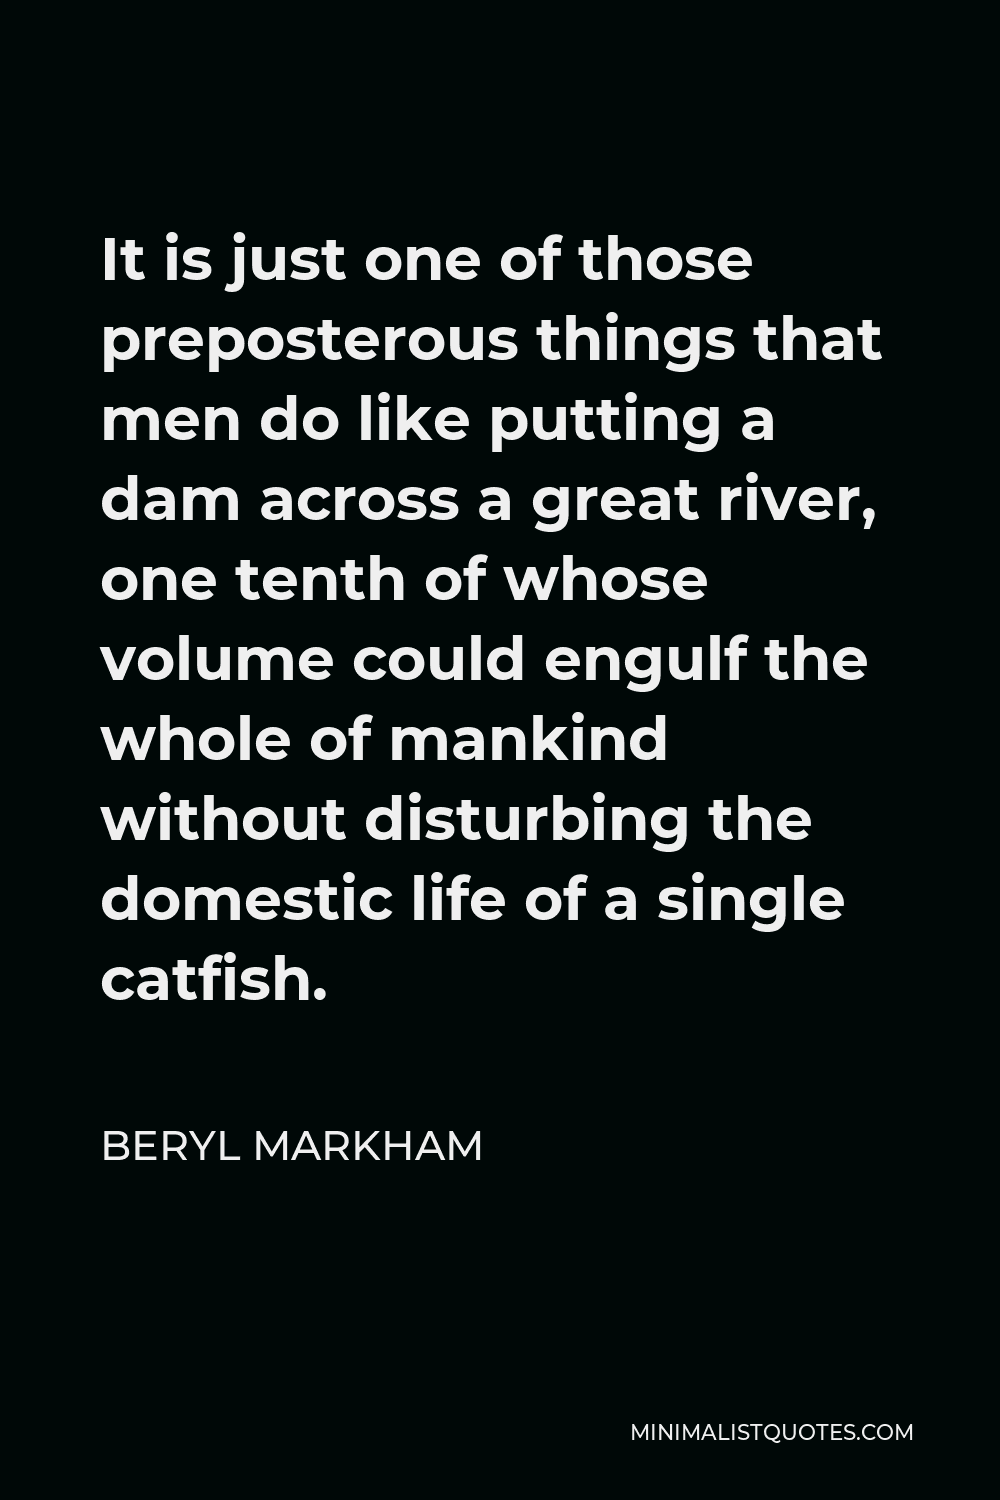 Beryl Markham Quote - It is just one of those preposterous things that men do like putting a dam across a great river, one tenth of whose volume could engulf the whole of mankind without disturbing the domestic life of a single catfish.